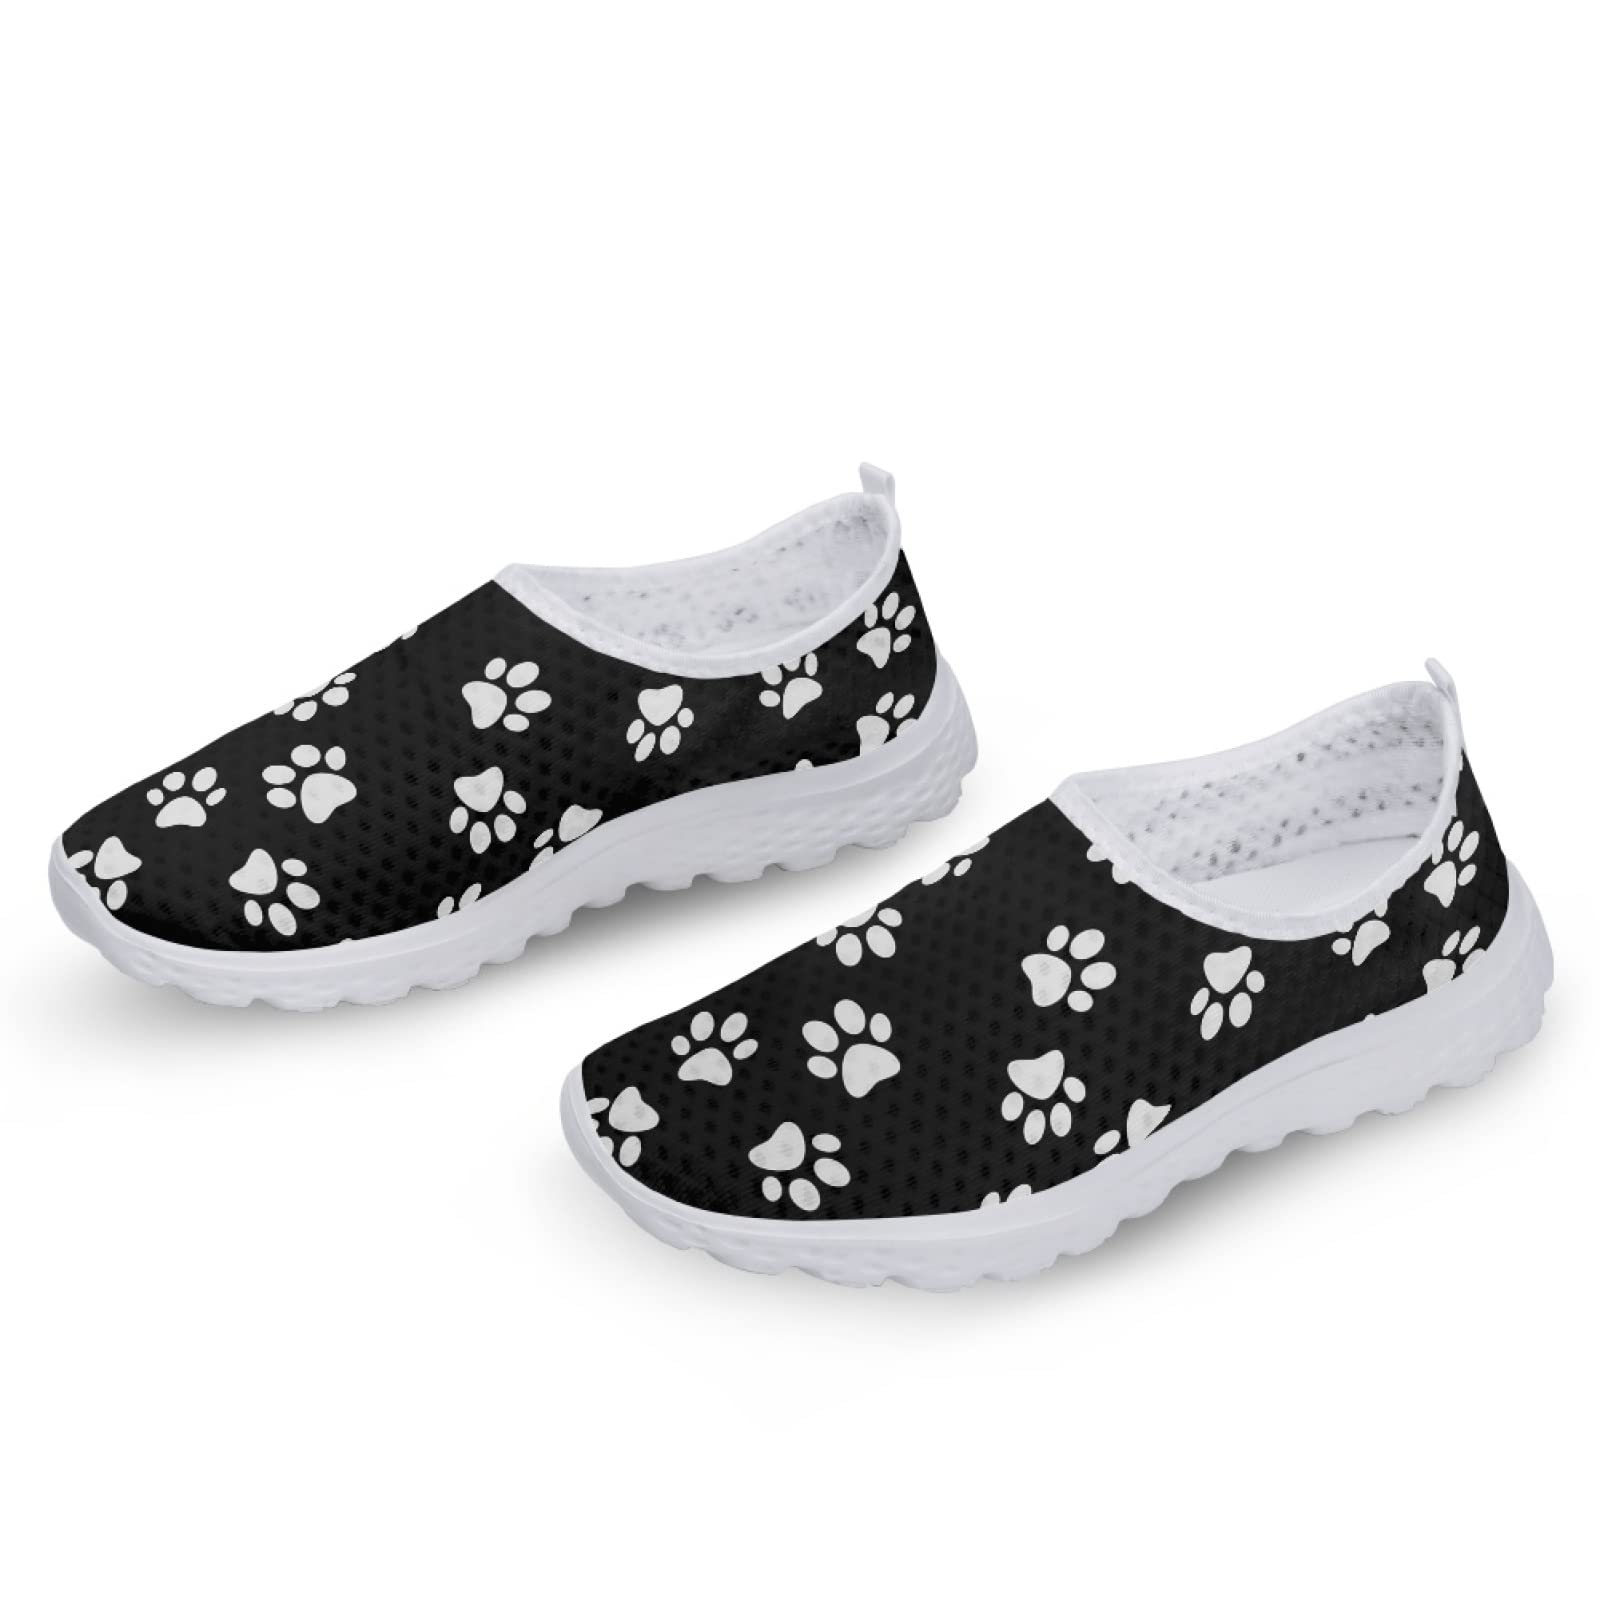 Coldinair White Paw Print Women's Sneakers Dog Paws Fitness Sports Walking Shoes Black Fashion Road Running Shoes Lady Girls Summer Workout Shoes Soft Shoe